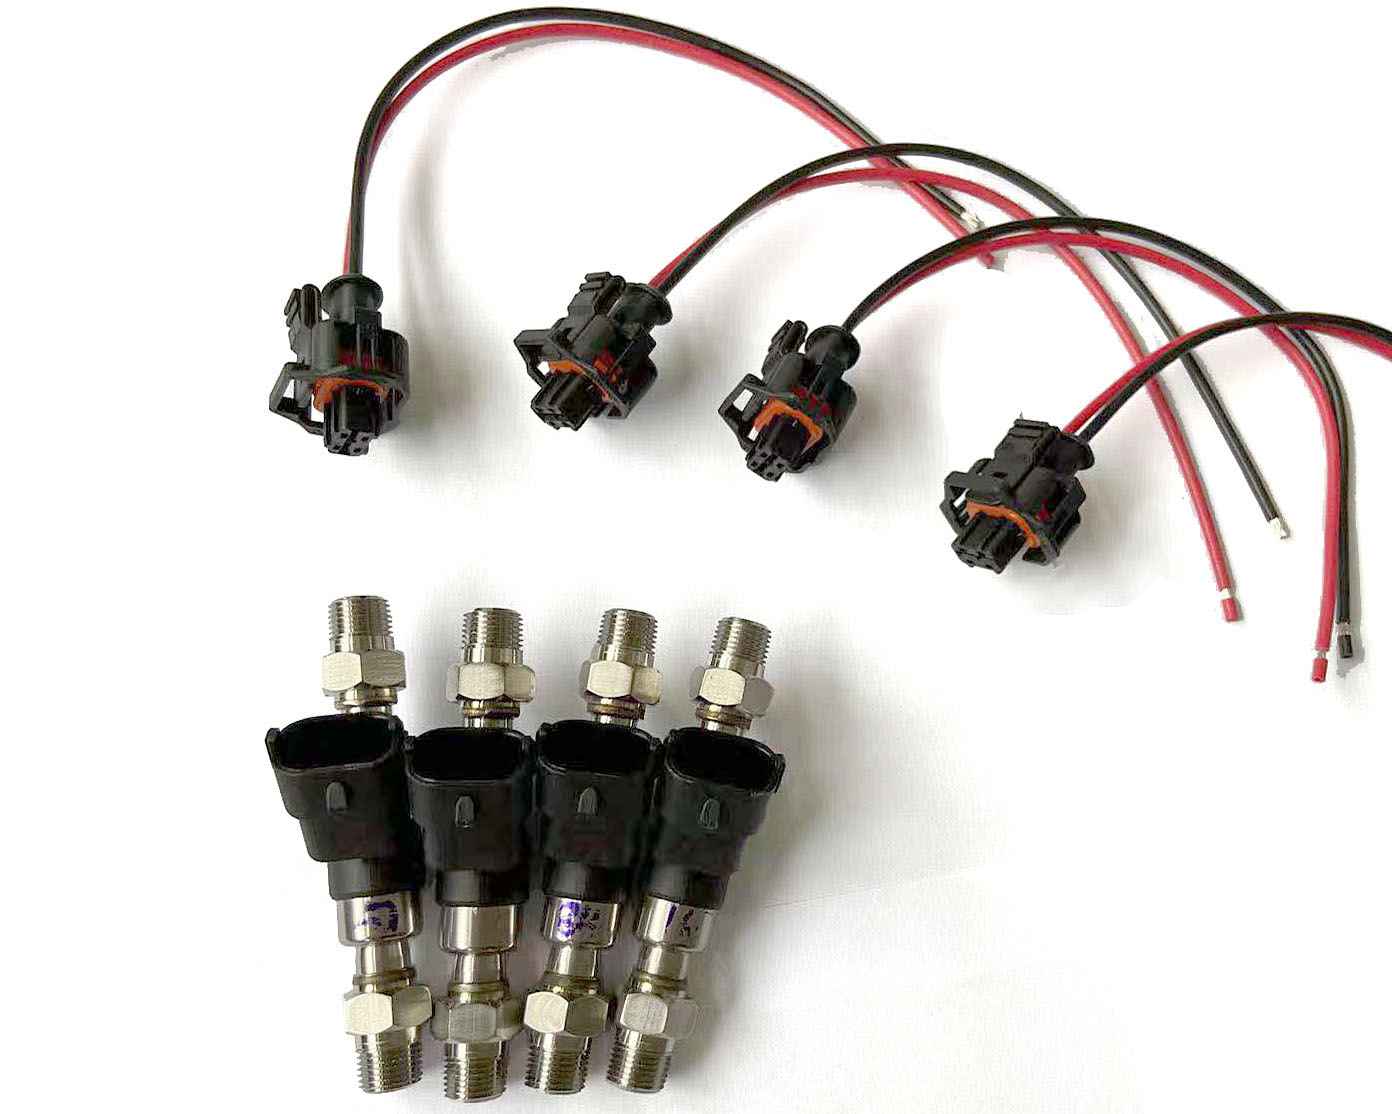 RACE valve with wiring harness